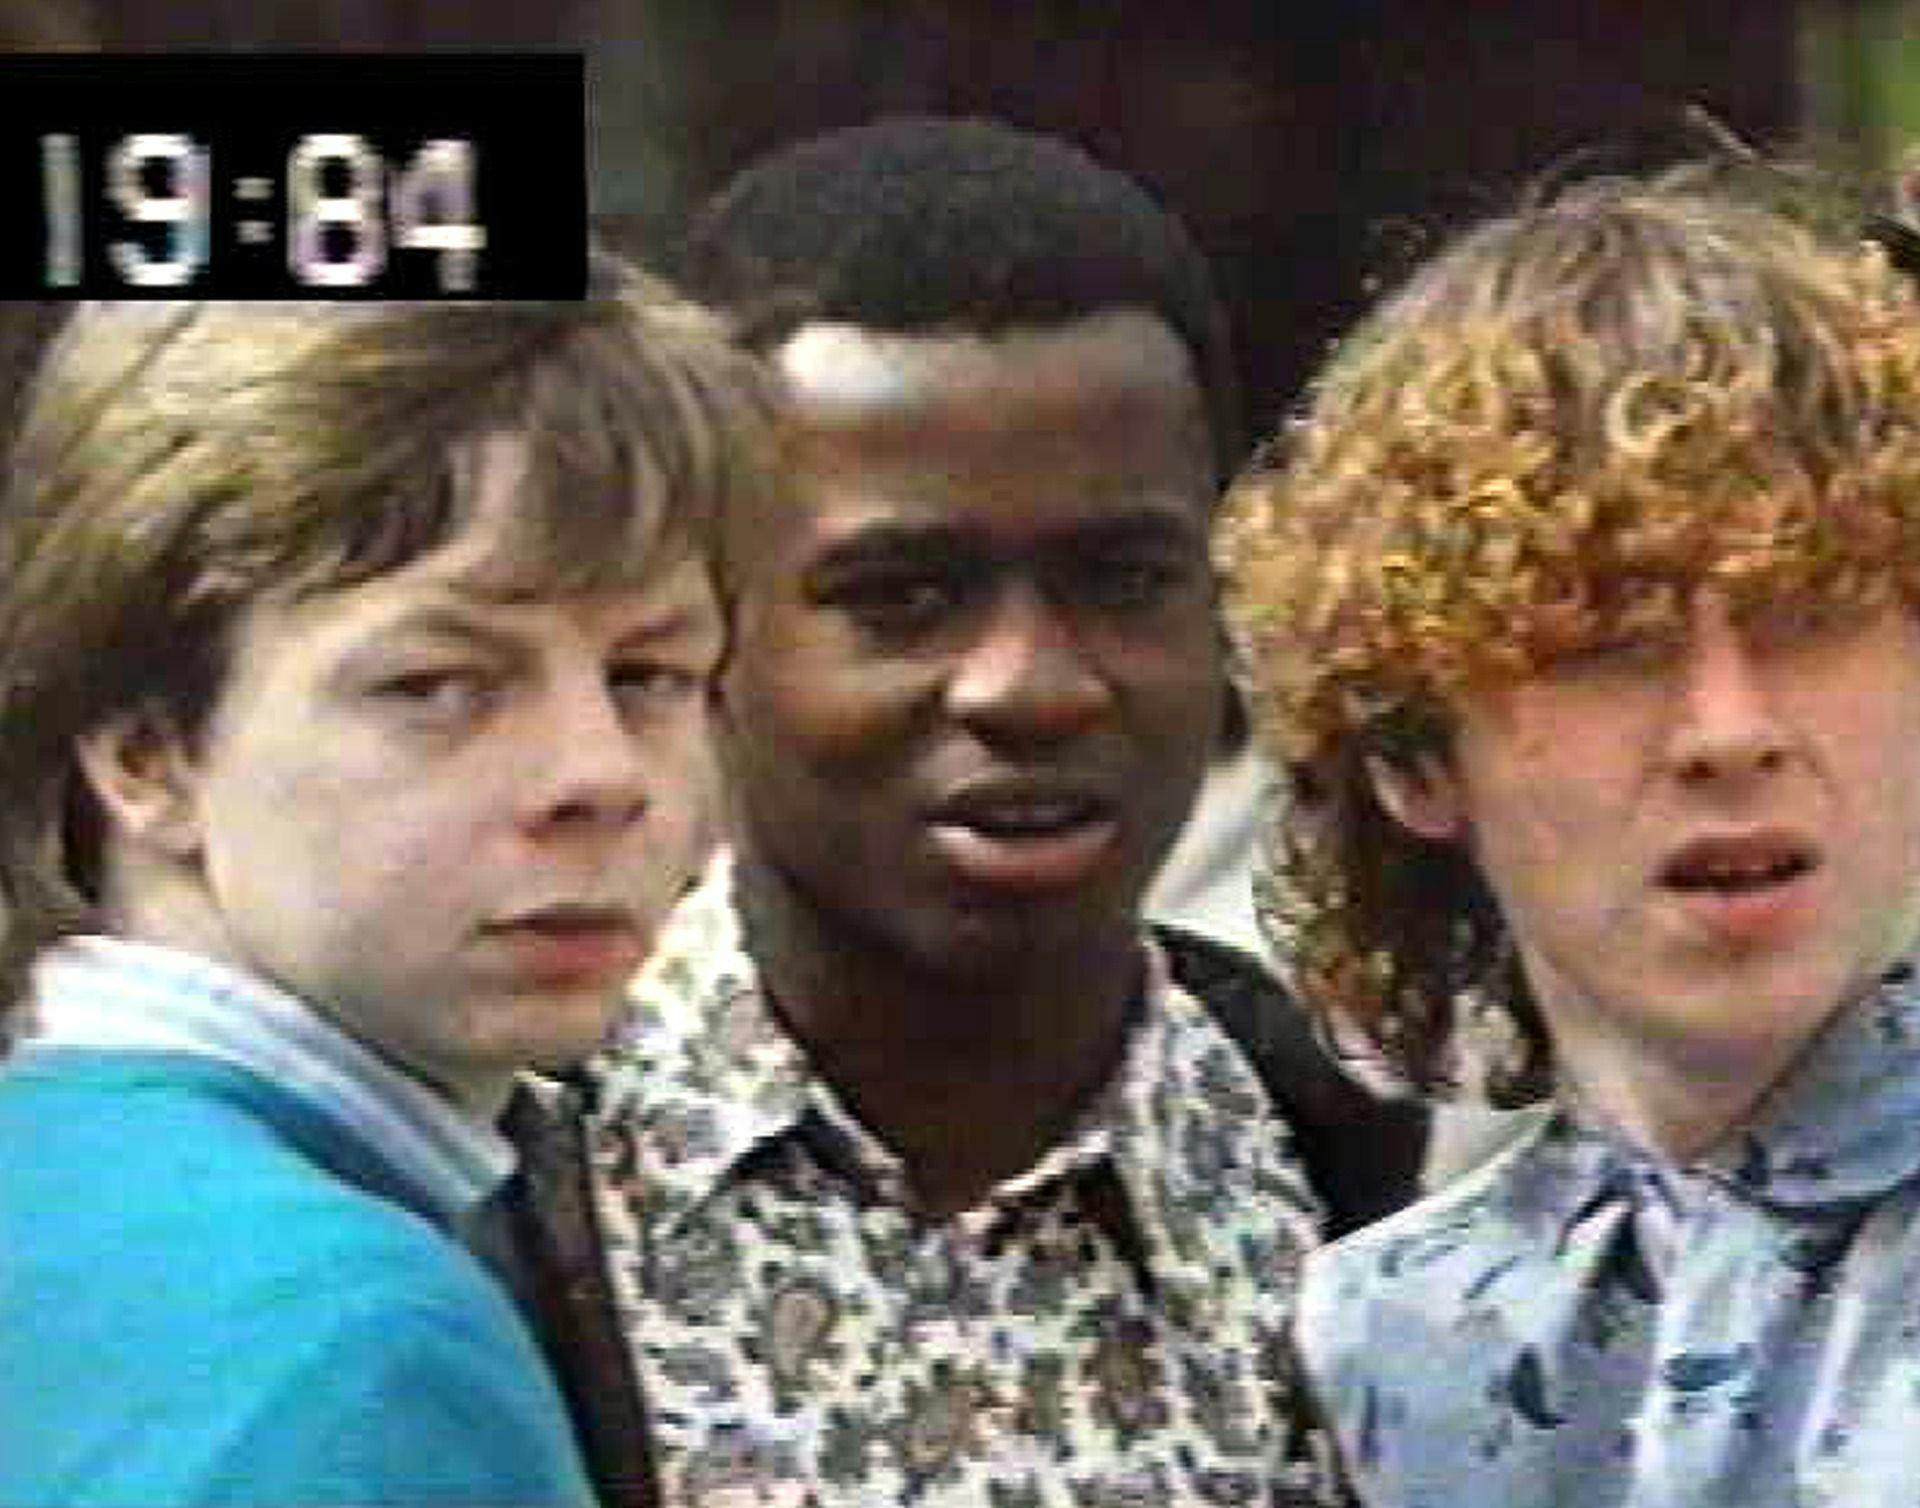 Image of three people from the shoulders up, two of them looking at the camera and the other looking into the distance. The numbers '19:84' appear in the top left corner as if it is VHS footage.